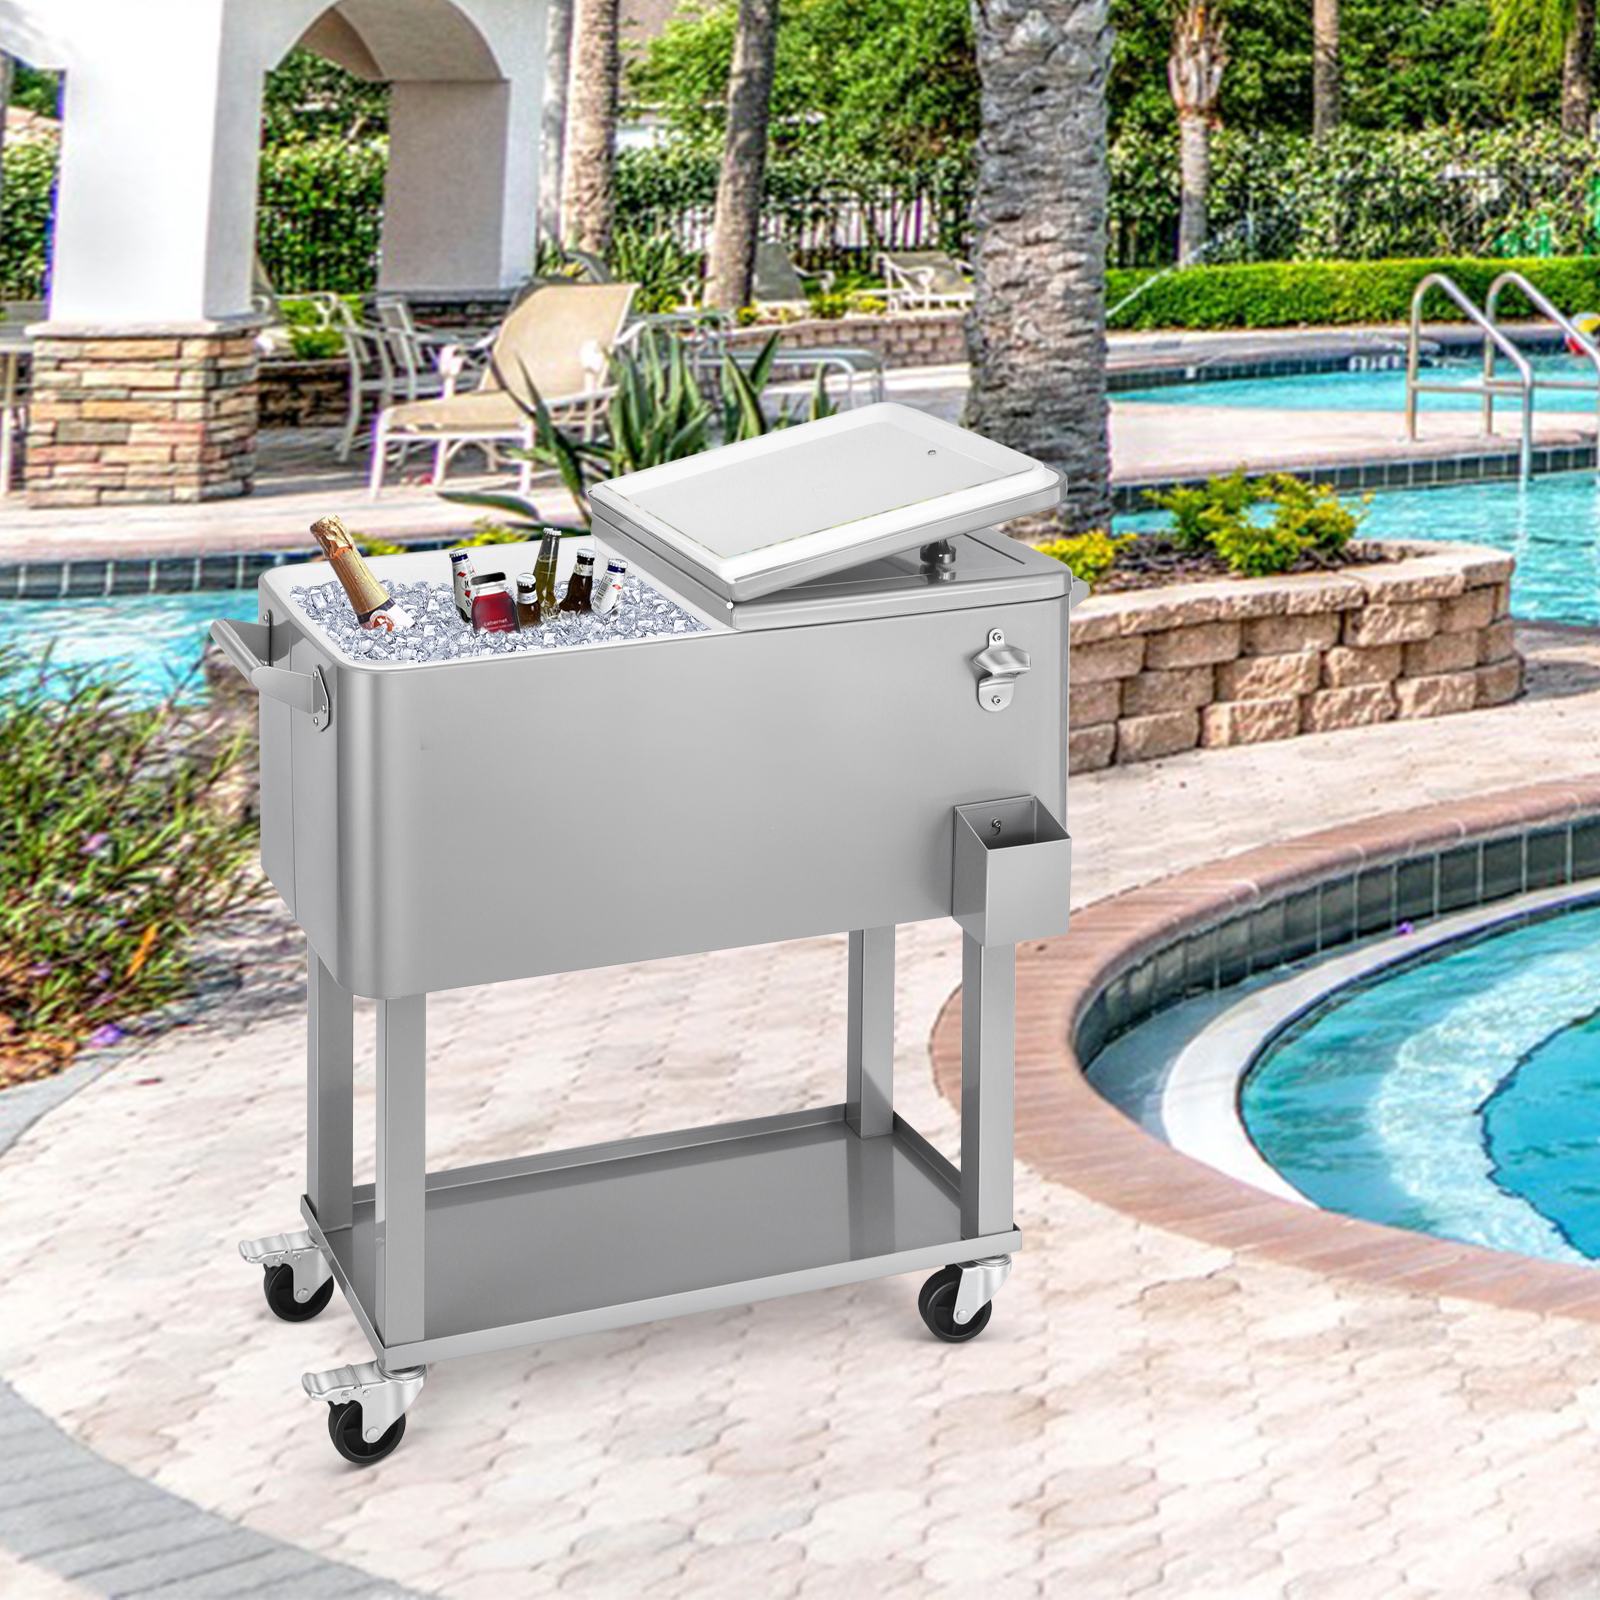 Grey　Cart　Bar　Tub　Portable　Qt　Party　Deck　Ice　Cold　Outdoor　80　for　Chest　Cooler　Drink　JIAD　Back-　Party　Rolling　Patio　Beverage